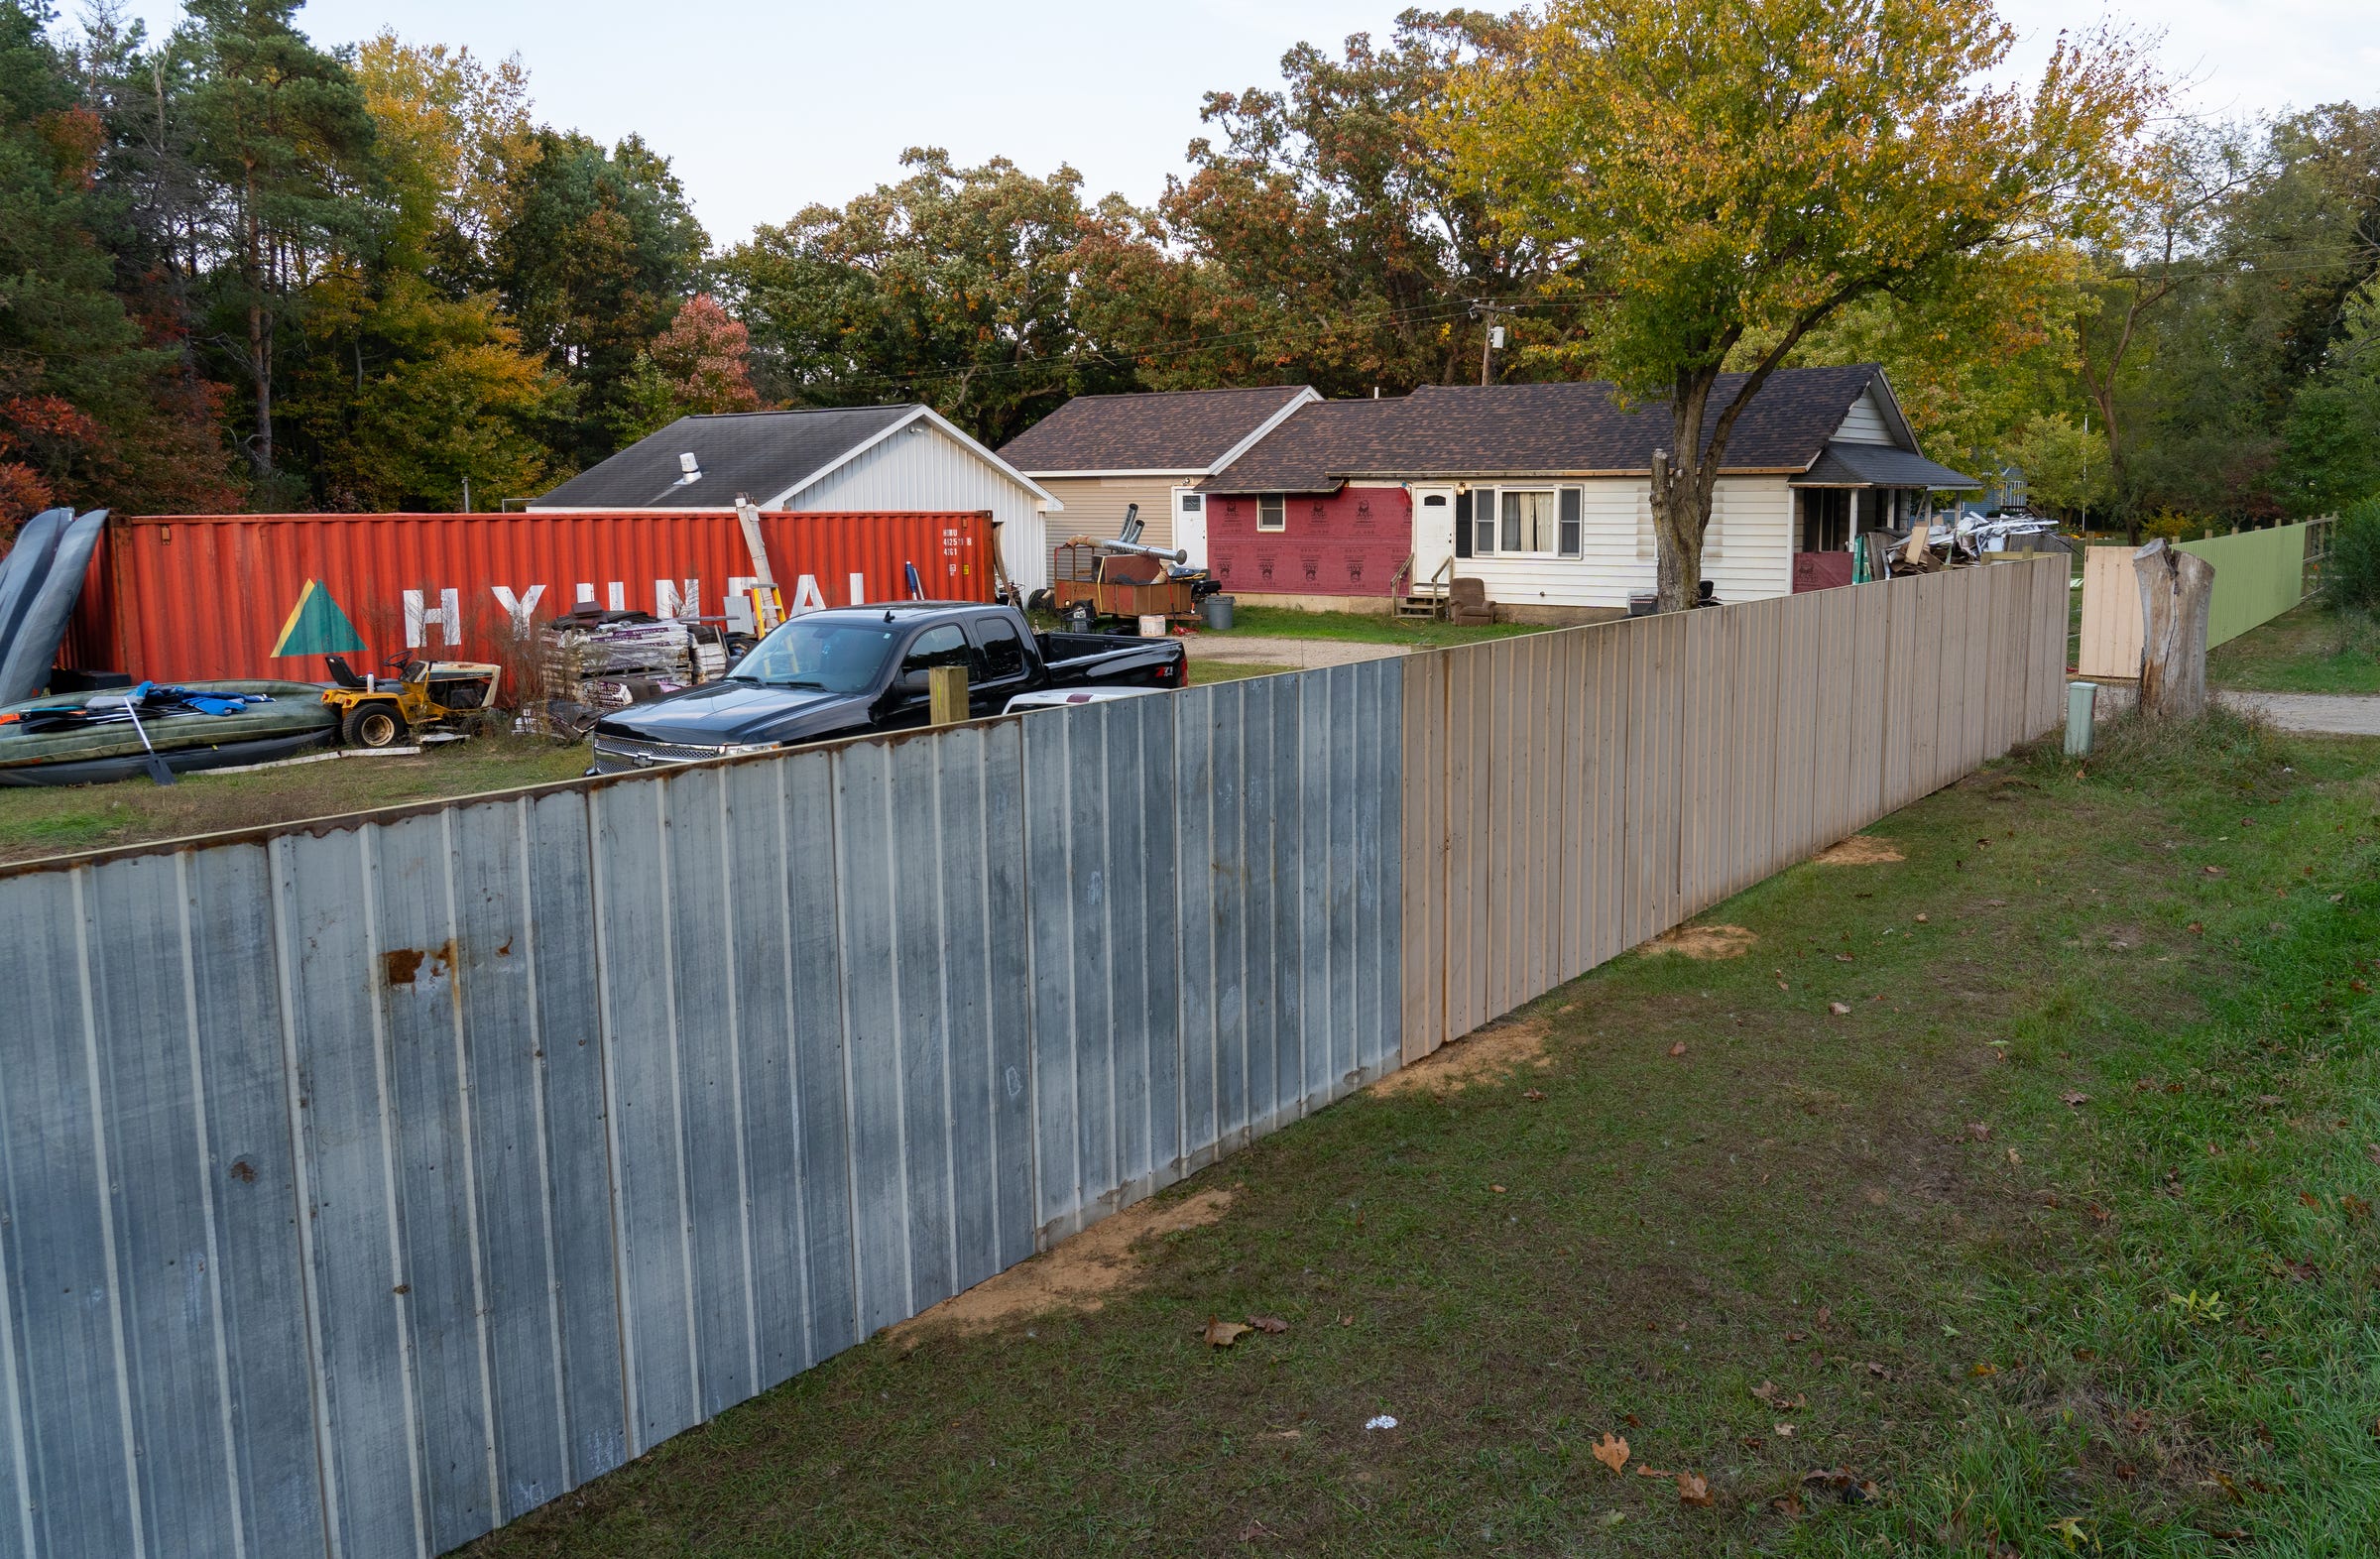 A wall recently constructed outside of the home of William Null in Shelbyville is seen outside of his home on Friday, October 9, 2020. Null is involved as part of 13 suspects accused of plotting to abduct and possibly harm Michigan Gov. Gretchen.